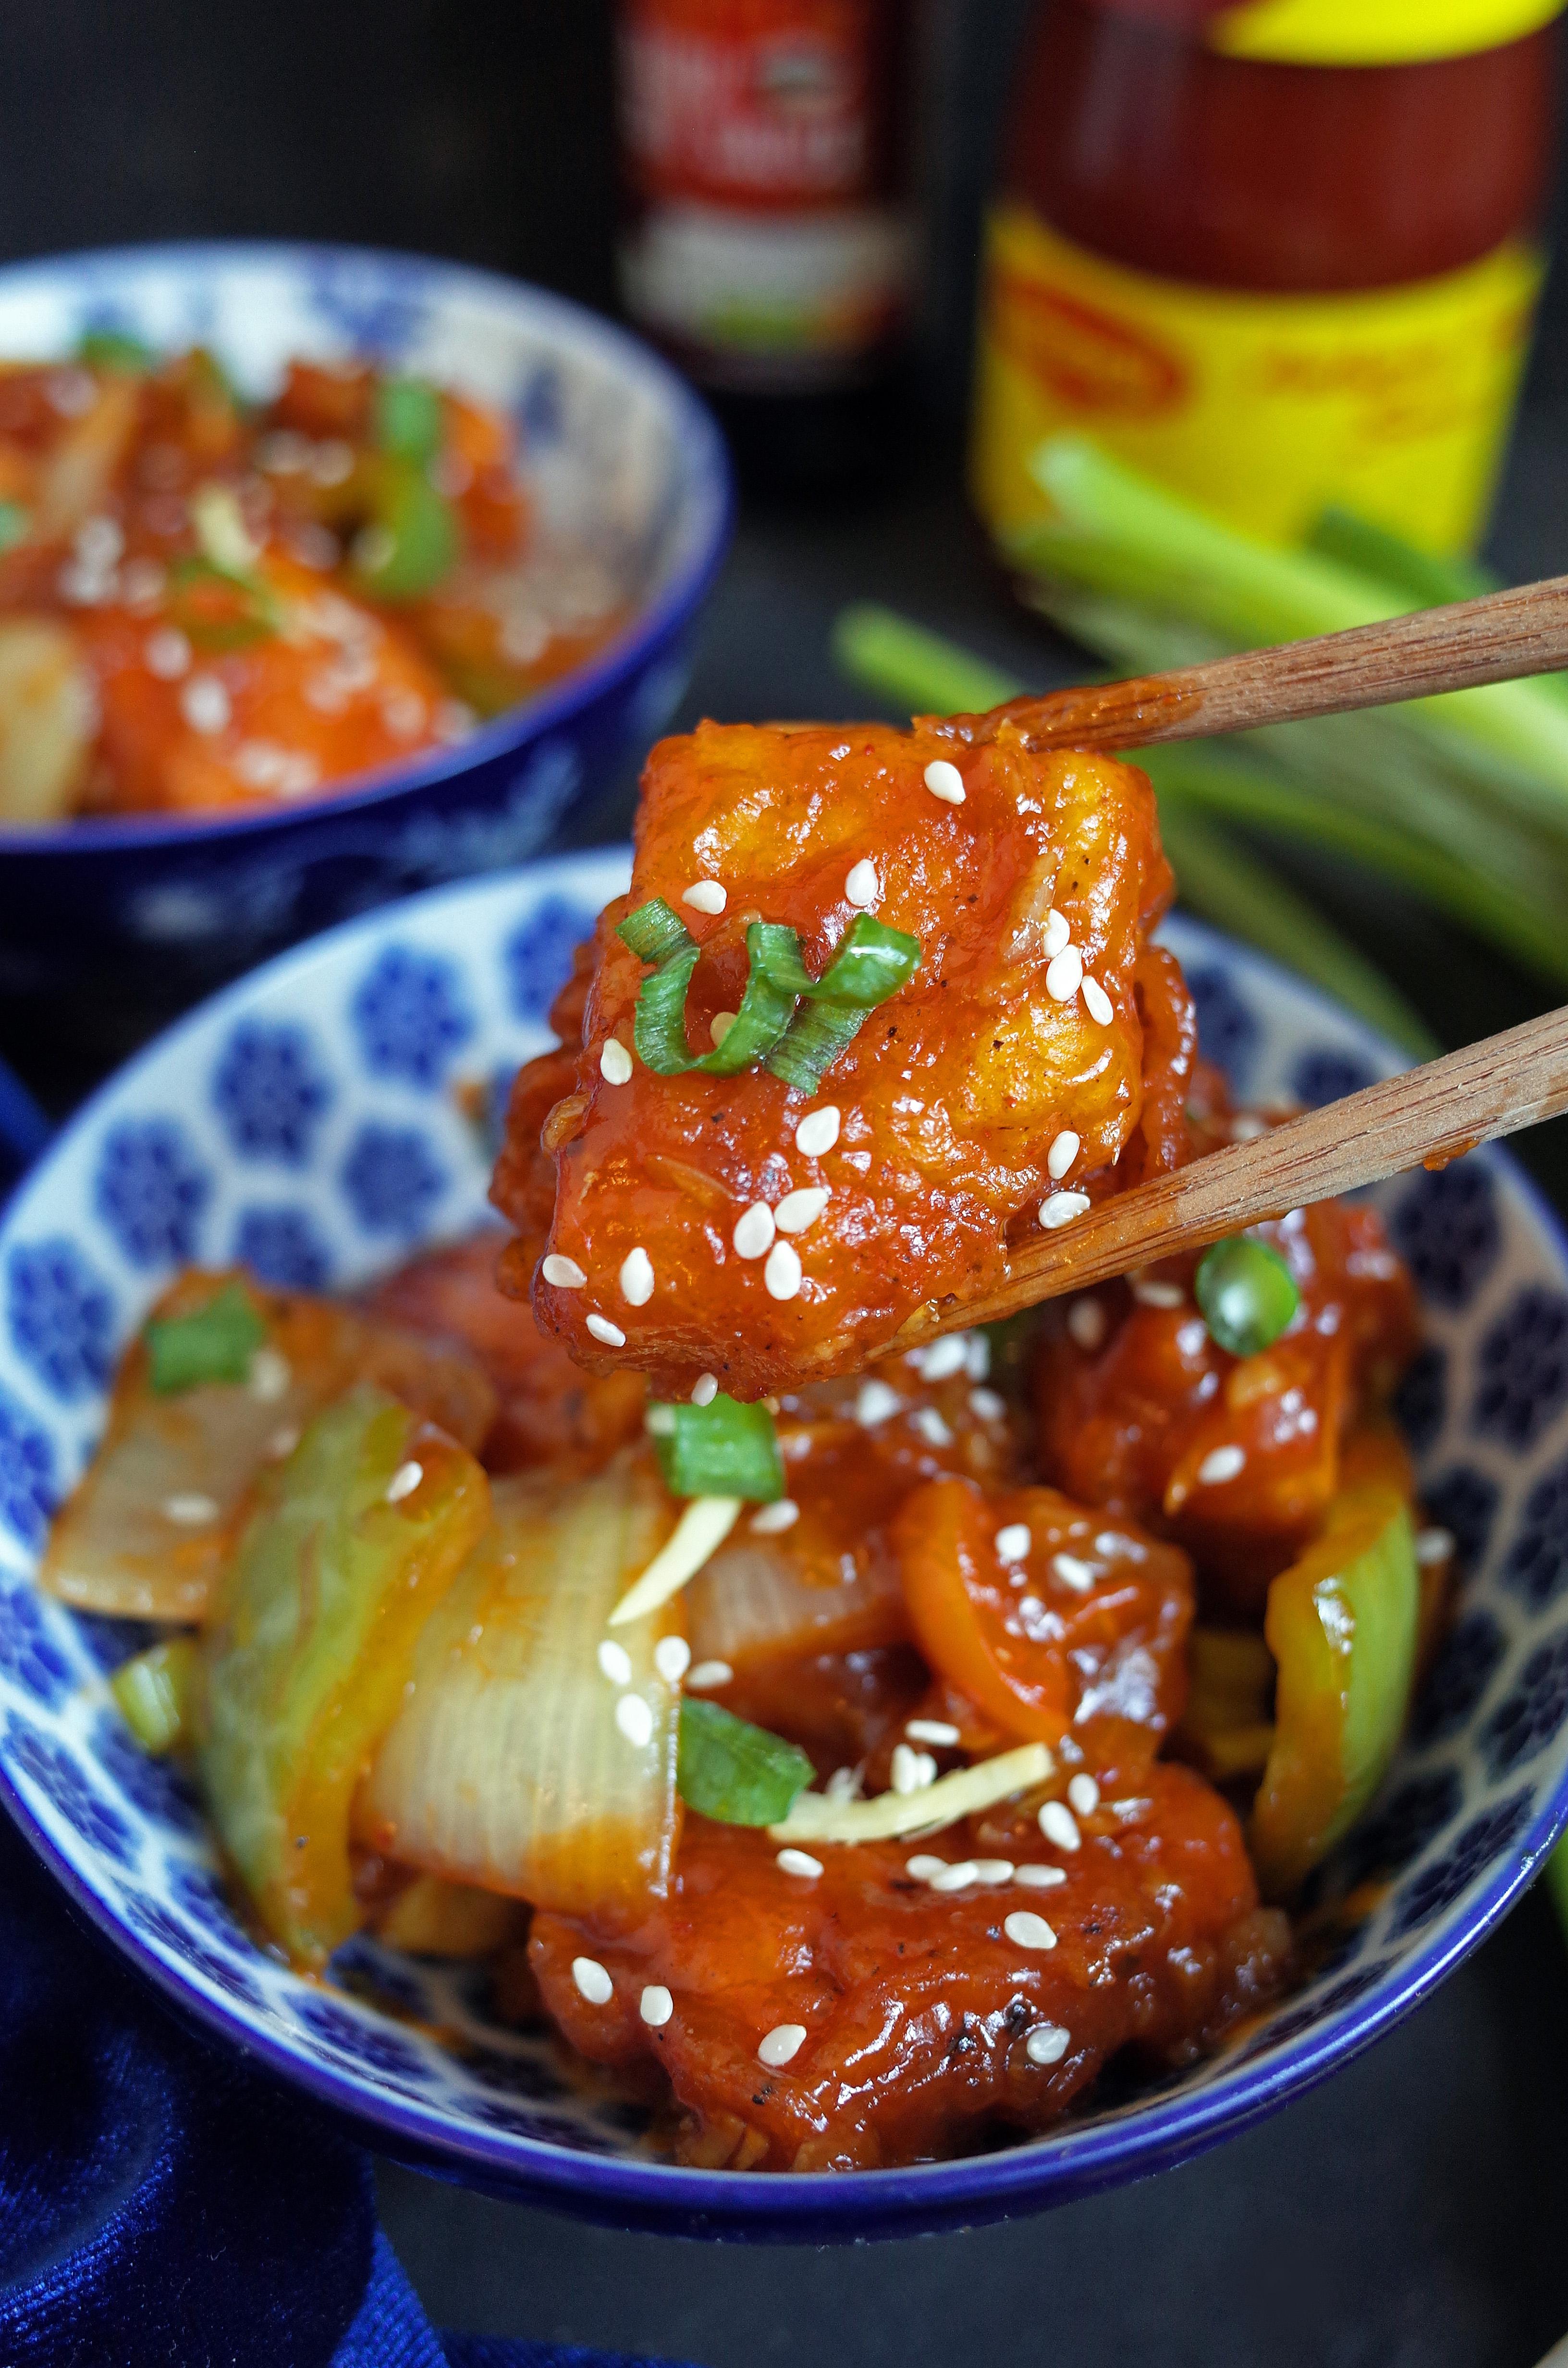 Vegan Chilli Tofu - Homemade Tofu which is Battered and coated in a ...